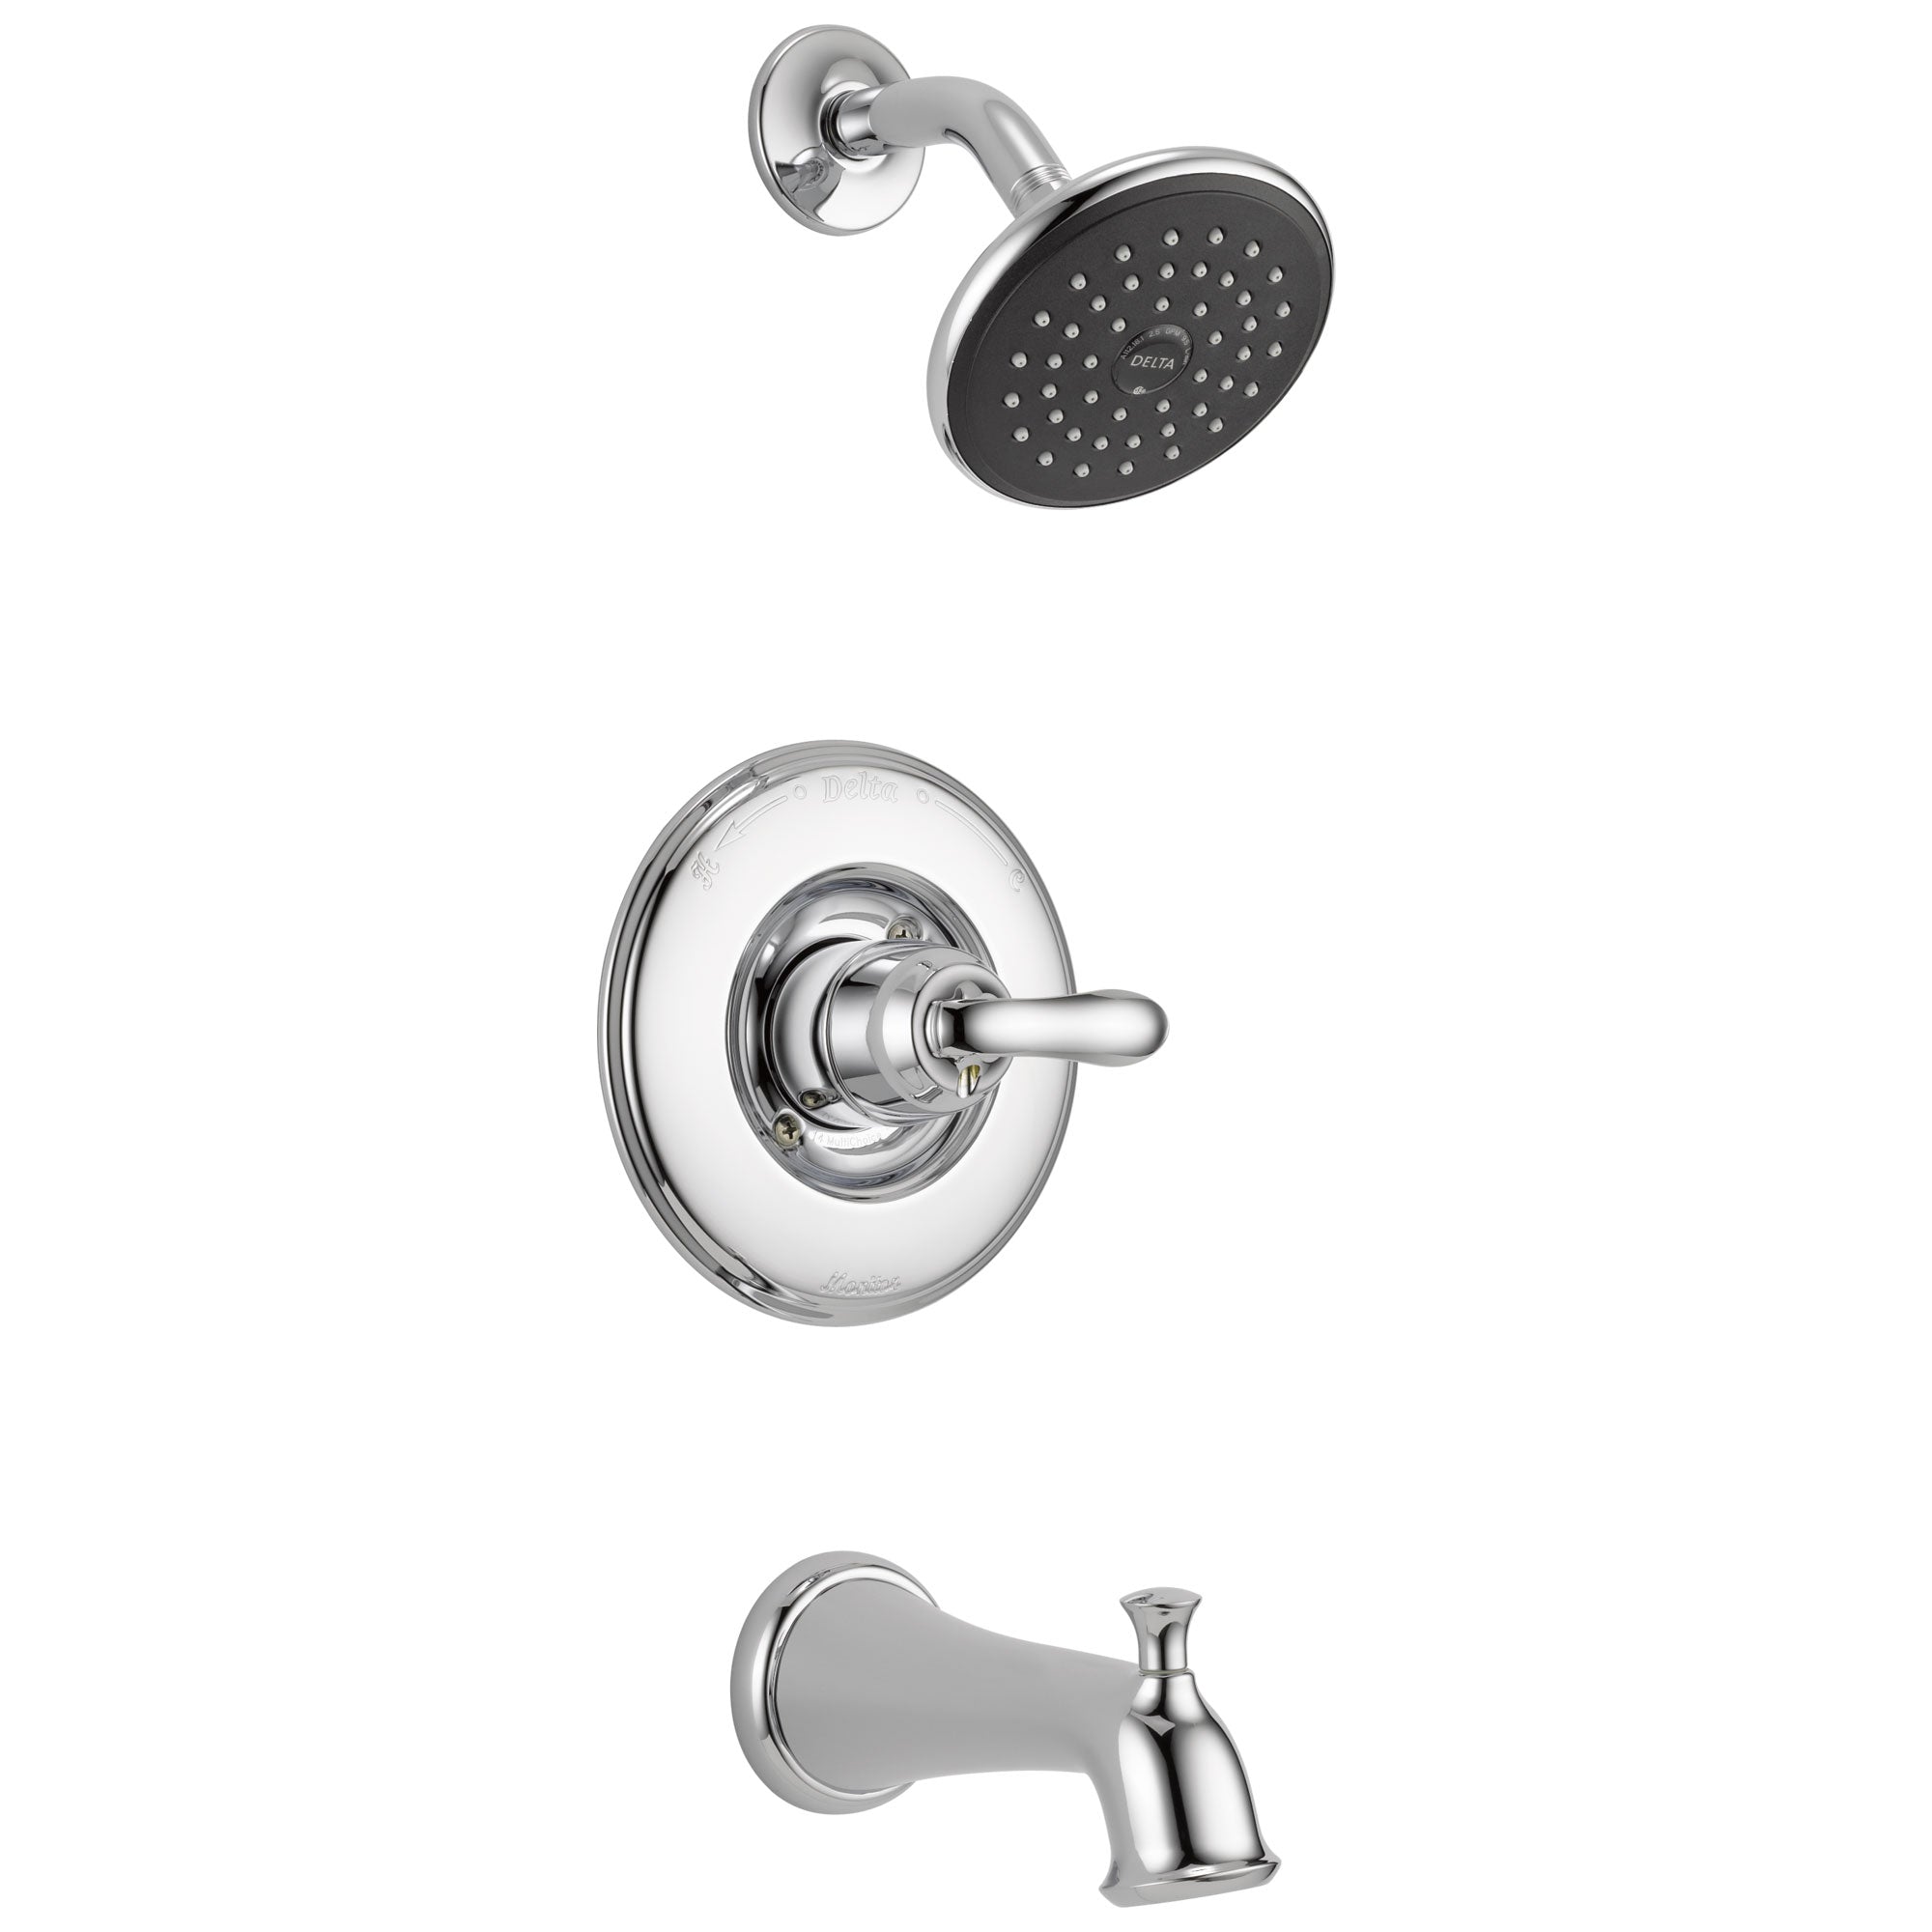 Delta Linden Collection Chrome Finish Monitor 14 Series Tub and Shower Combo Faucet Includes Trim Kit Rough Valve without Stops D2363V